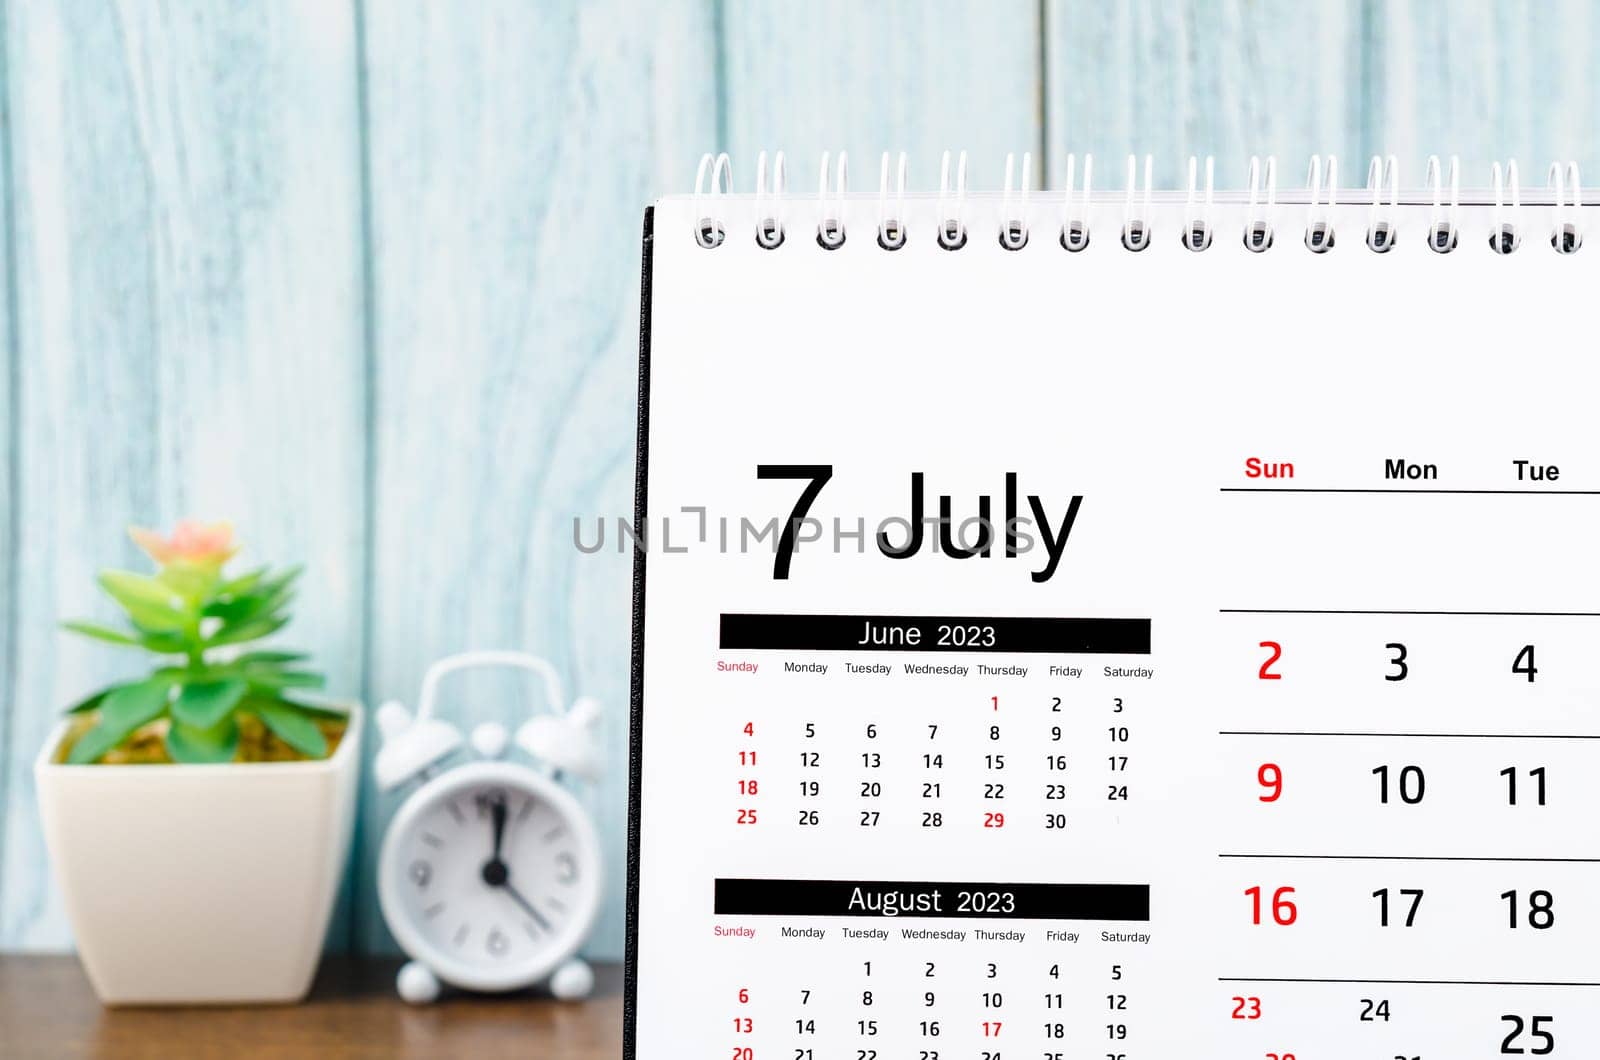 July 2023 Monthly desk calendar for 2023 year with alarm clock on blue wooden background.